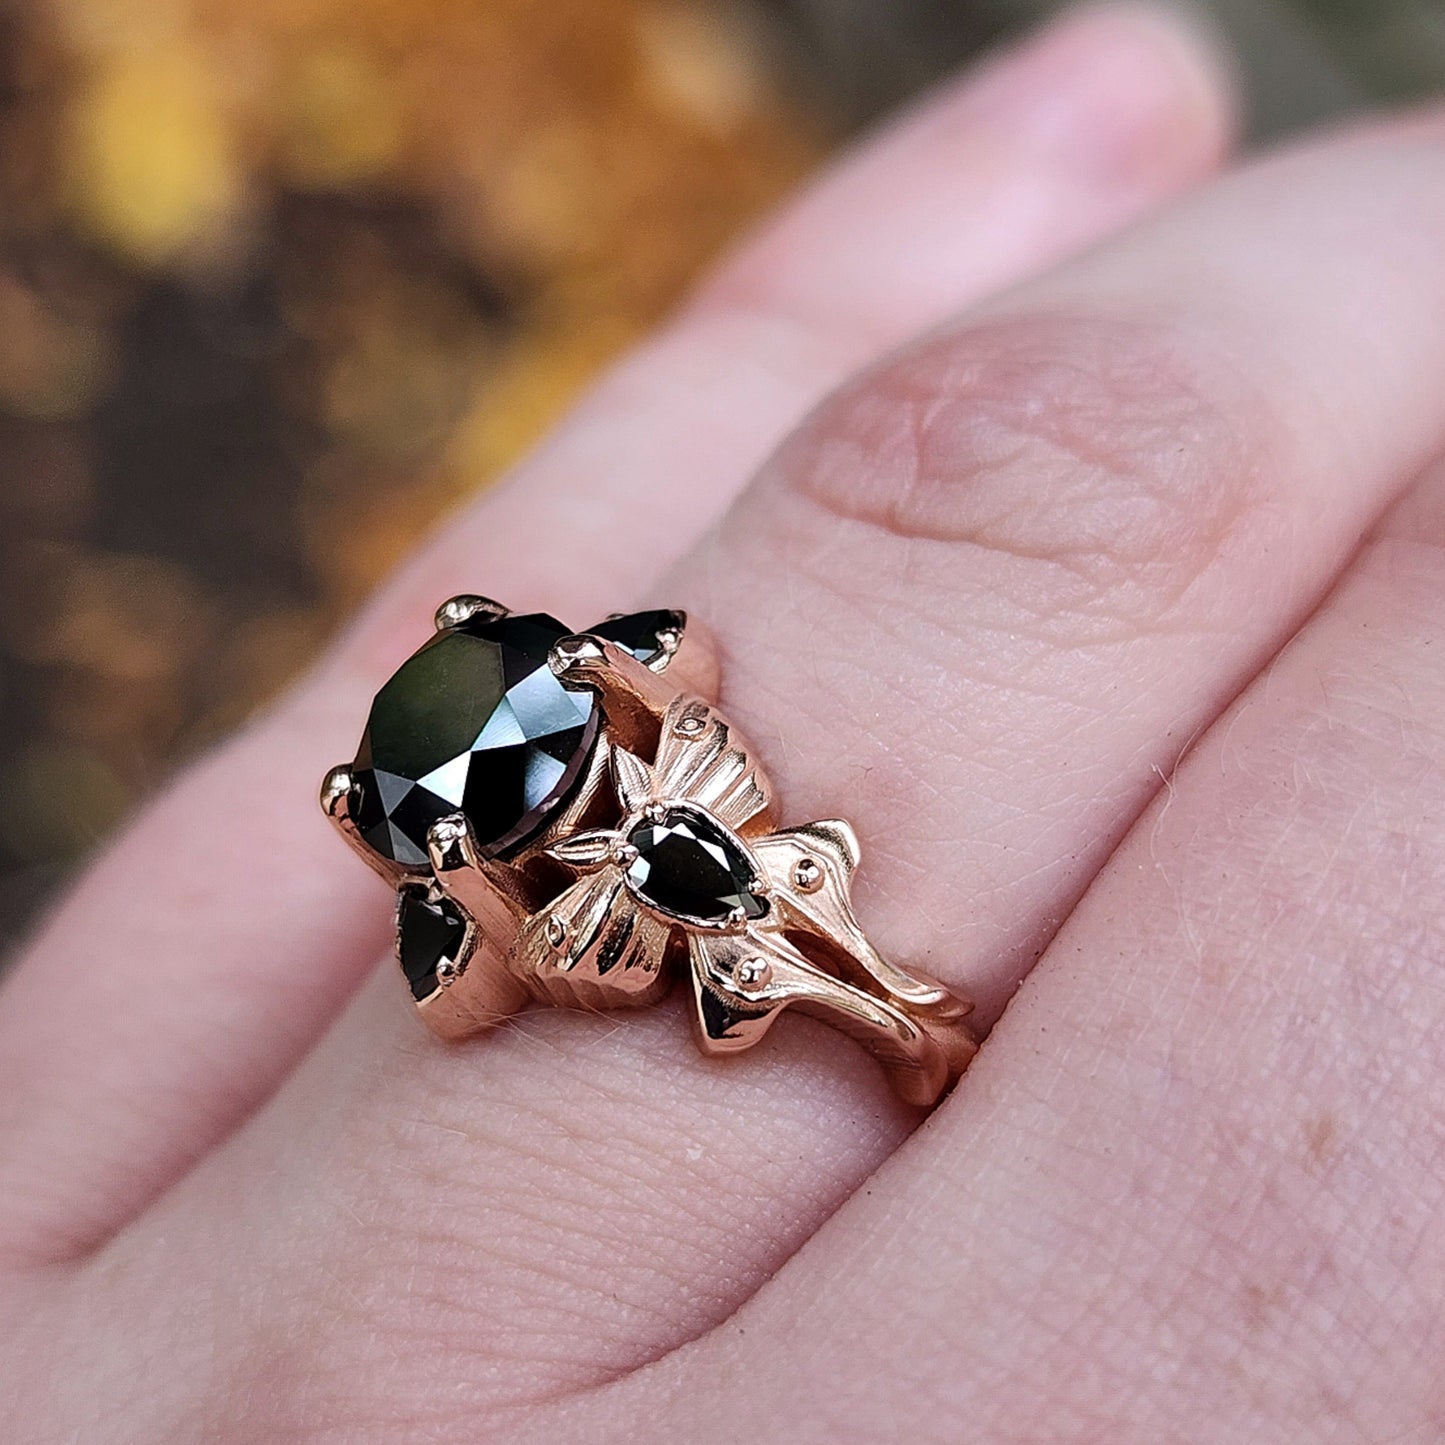 Luna Goth Moth Engagement Ring with Black Diamonds - Bug Wedding Ring Nature Inspired Fine Jewelry 14k Rose Gold Ready to Ship Size 6-8